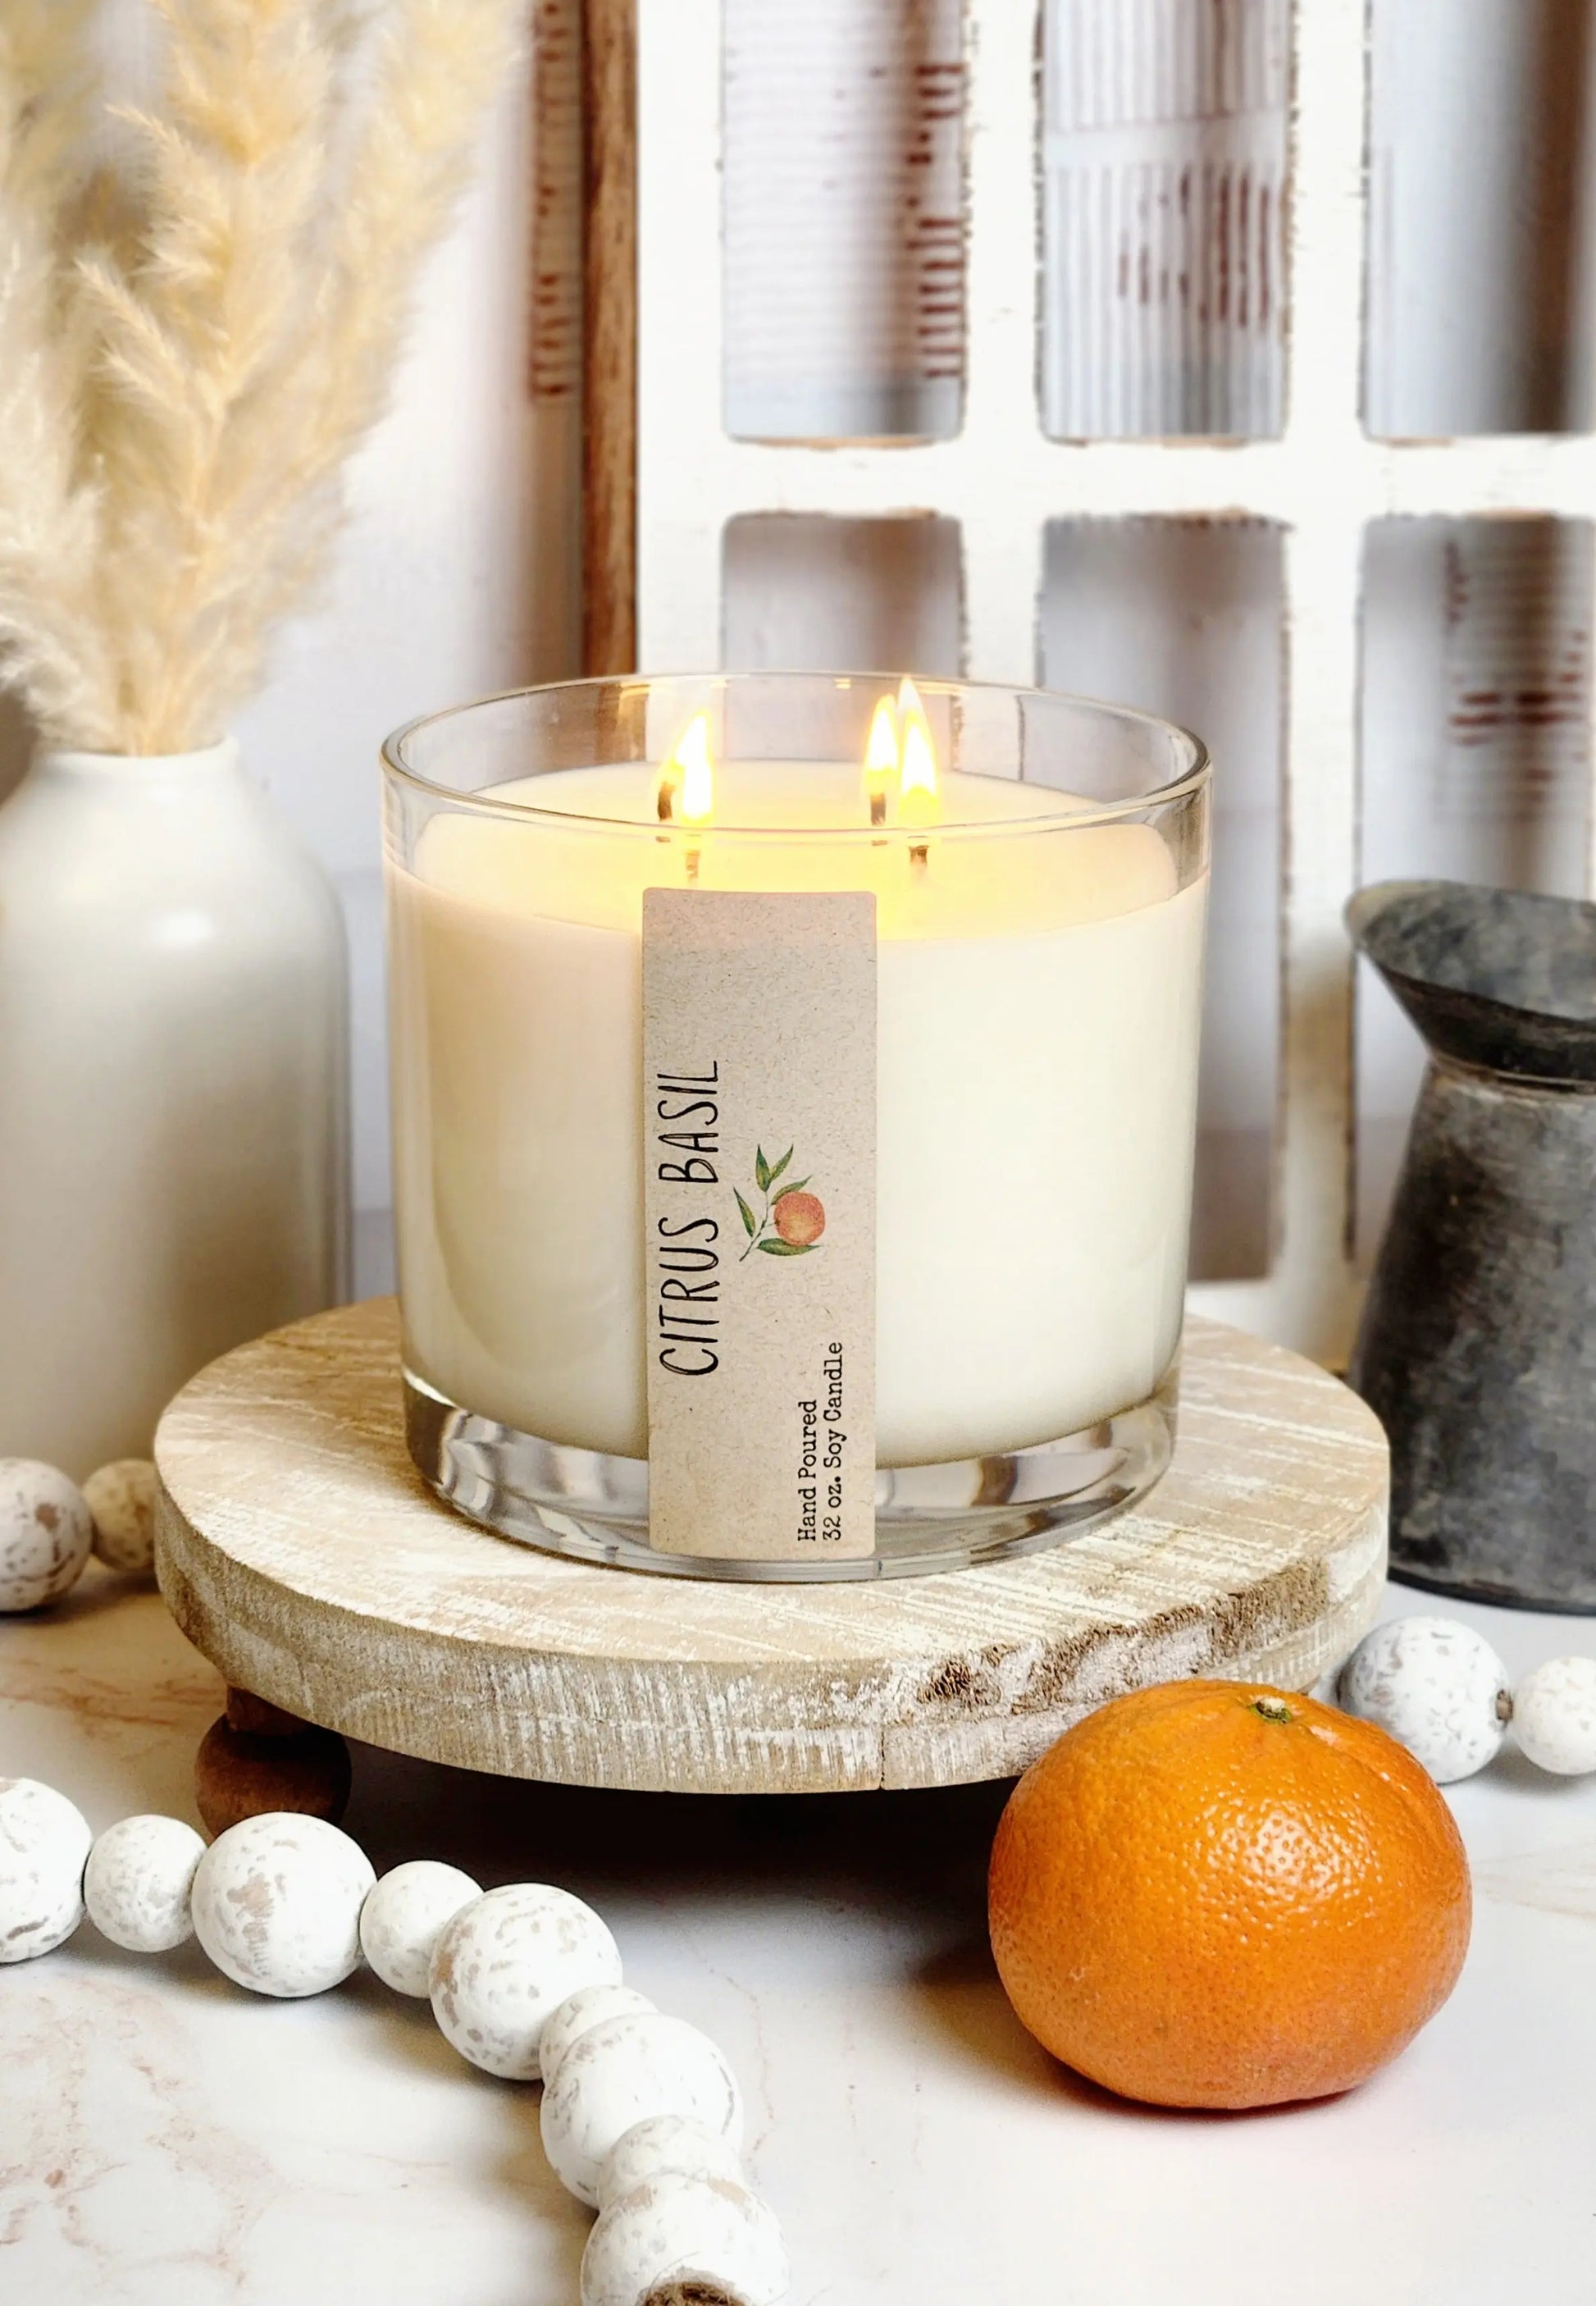 32oz Citrus Basil 4 Wick Soy Candle - Cam Candles And Co.